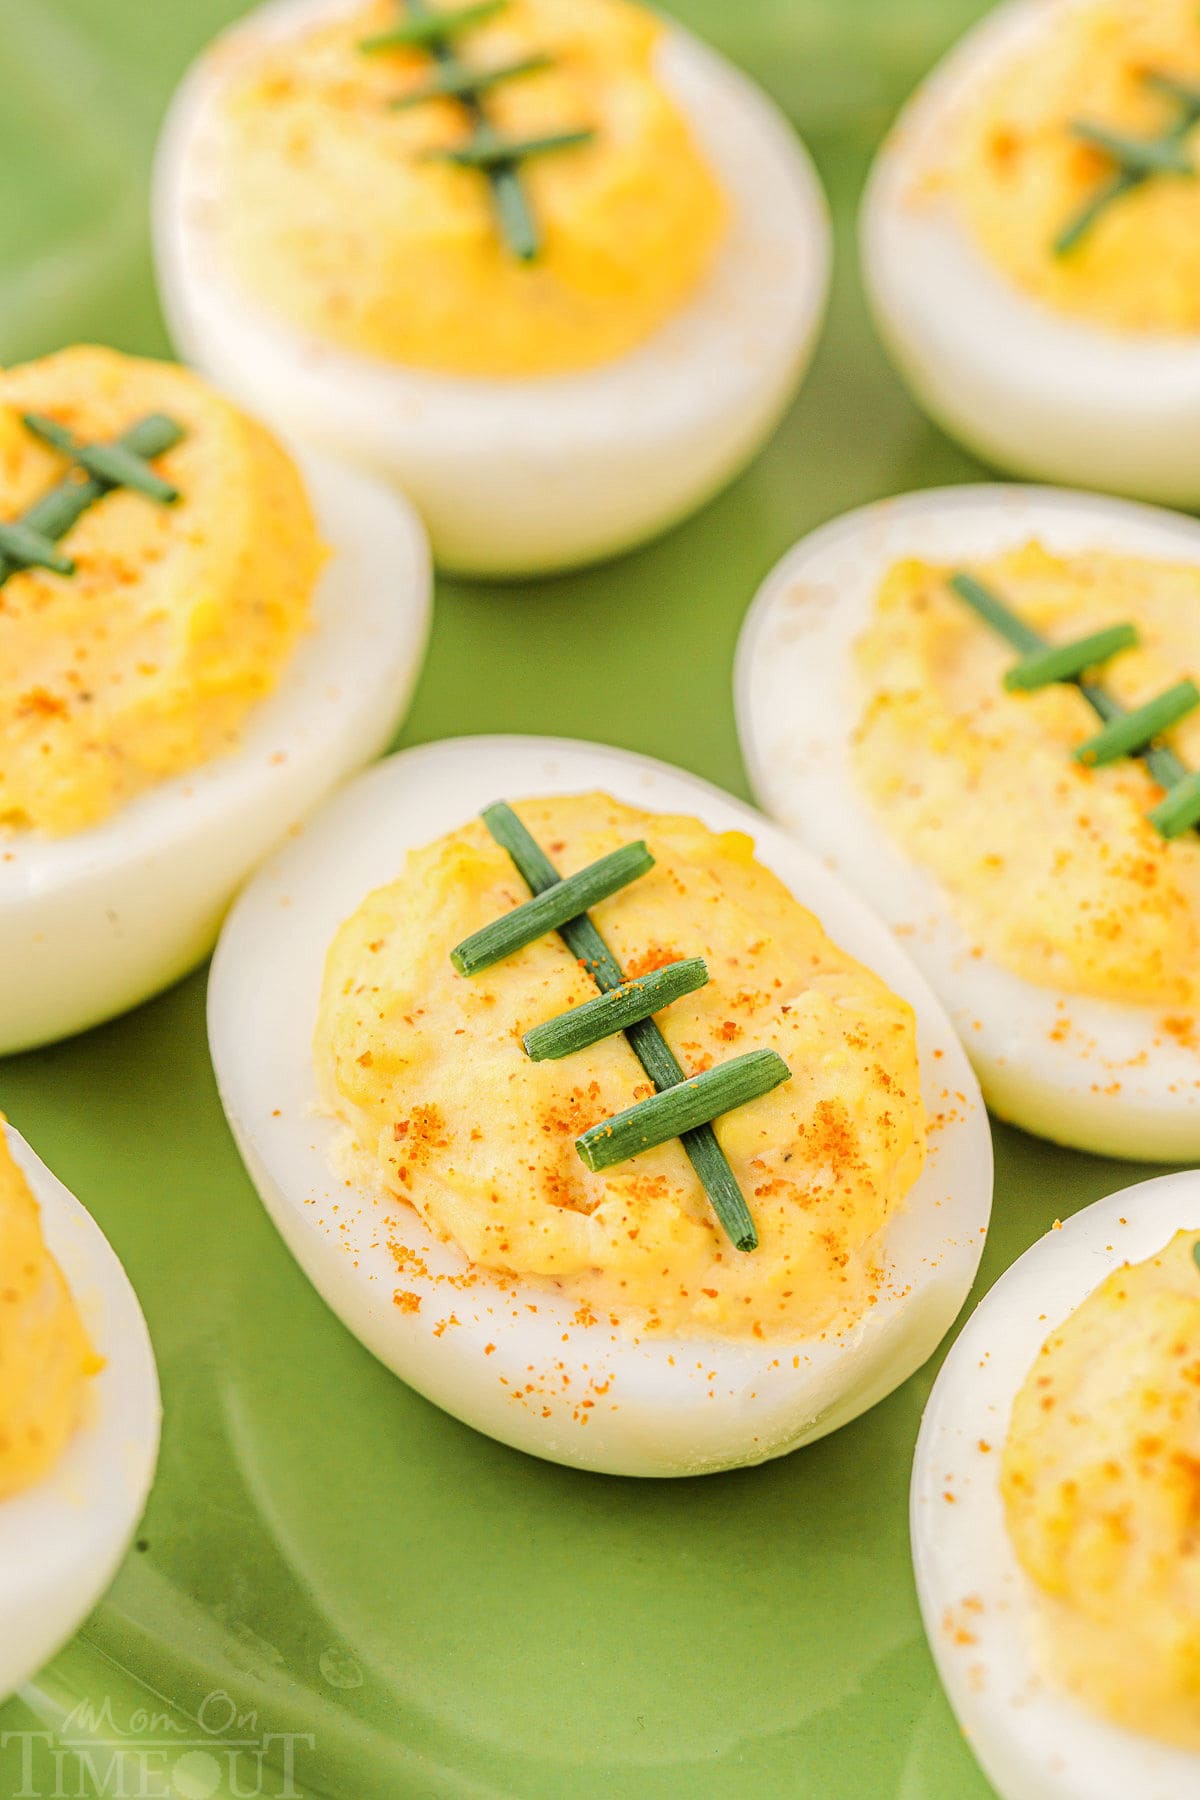 deviled eggs decorated to look like footballs with chives on a green plate.